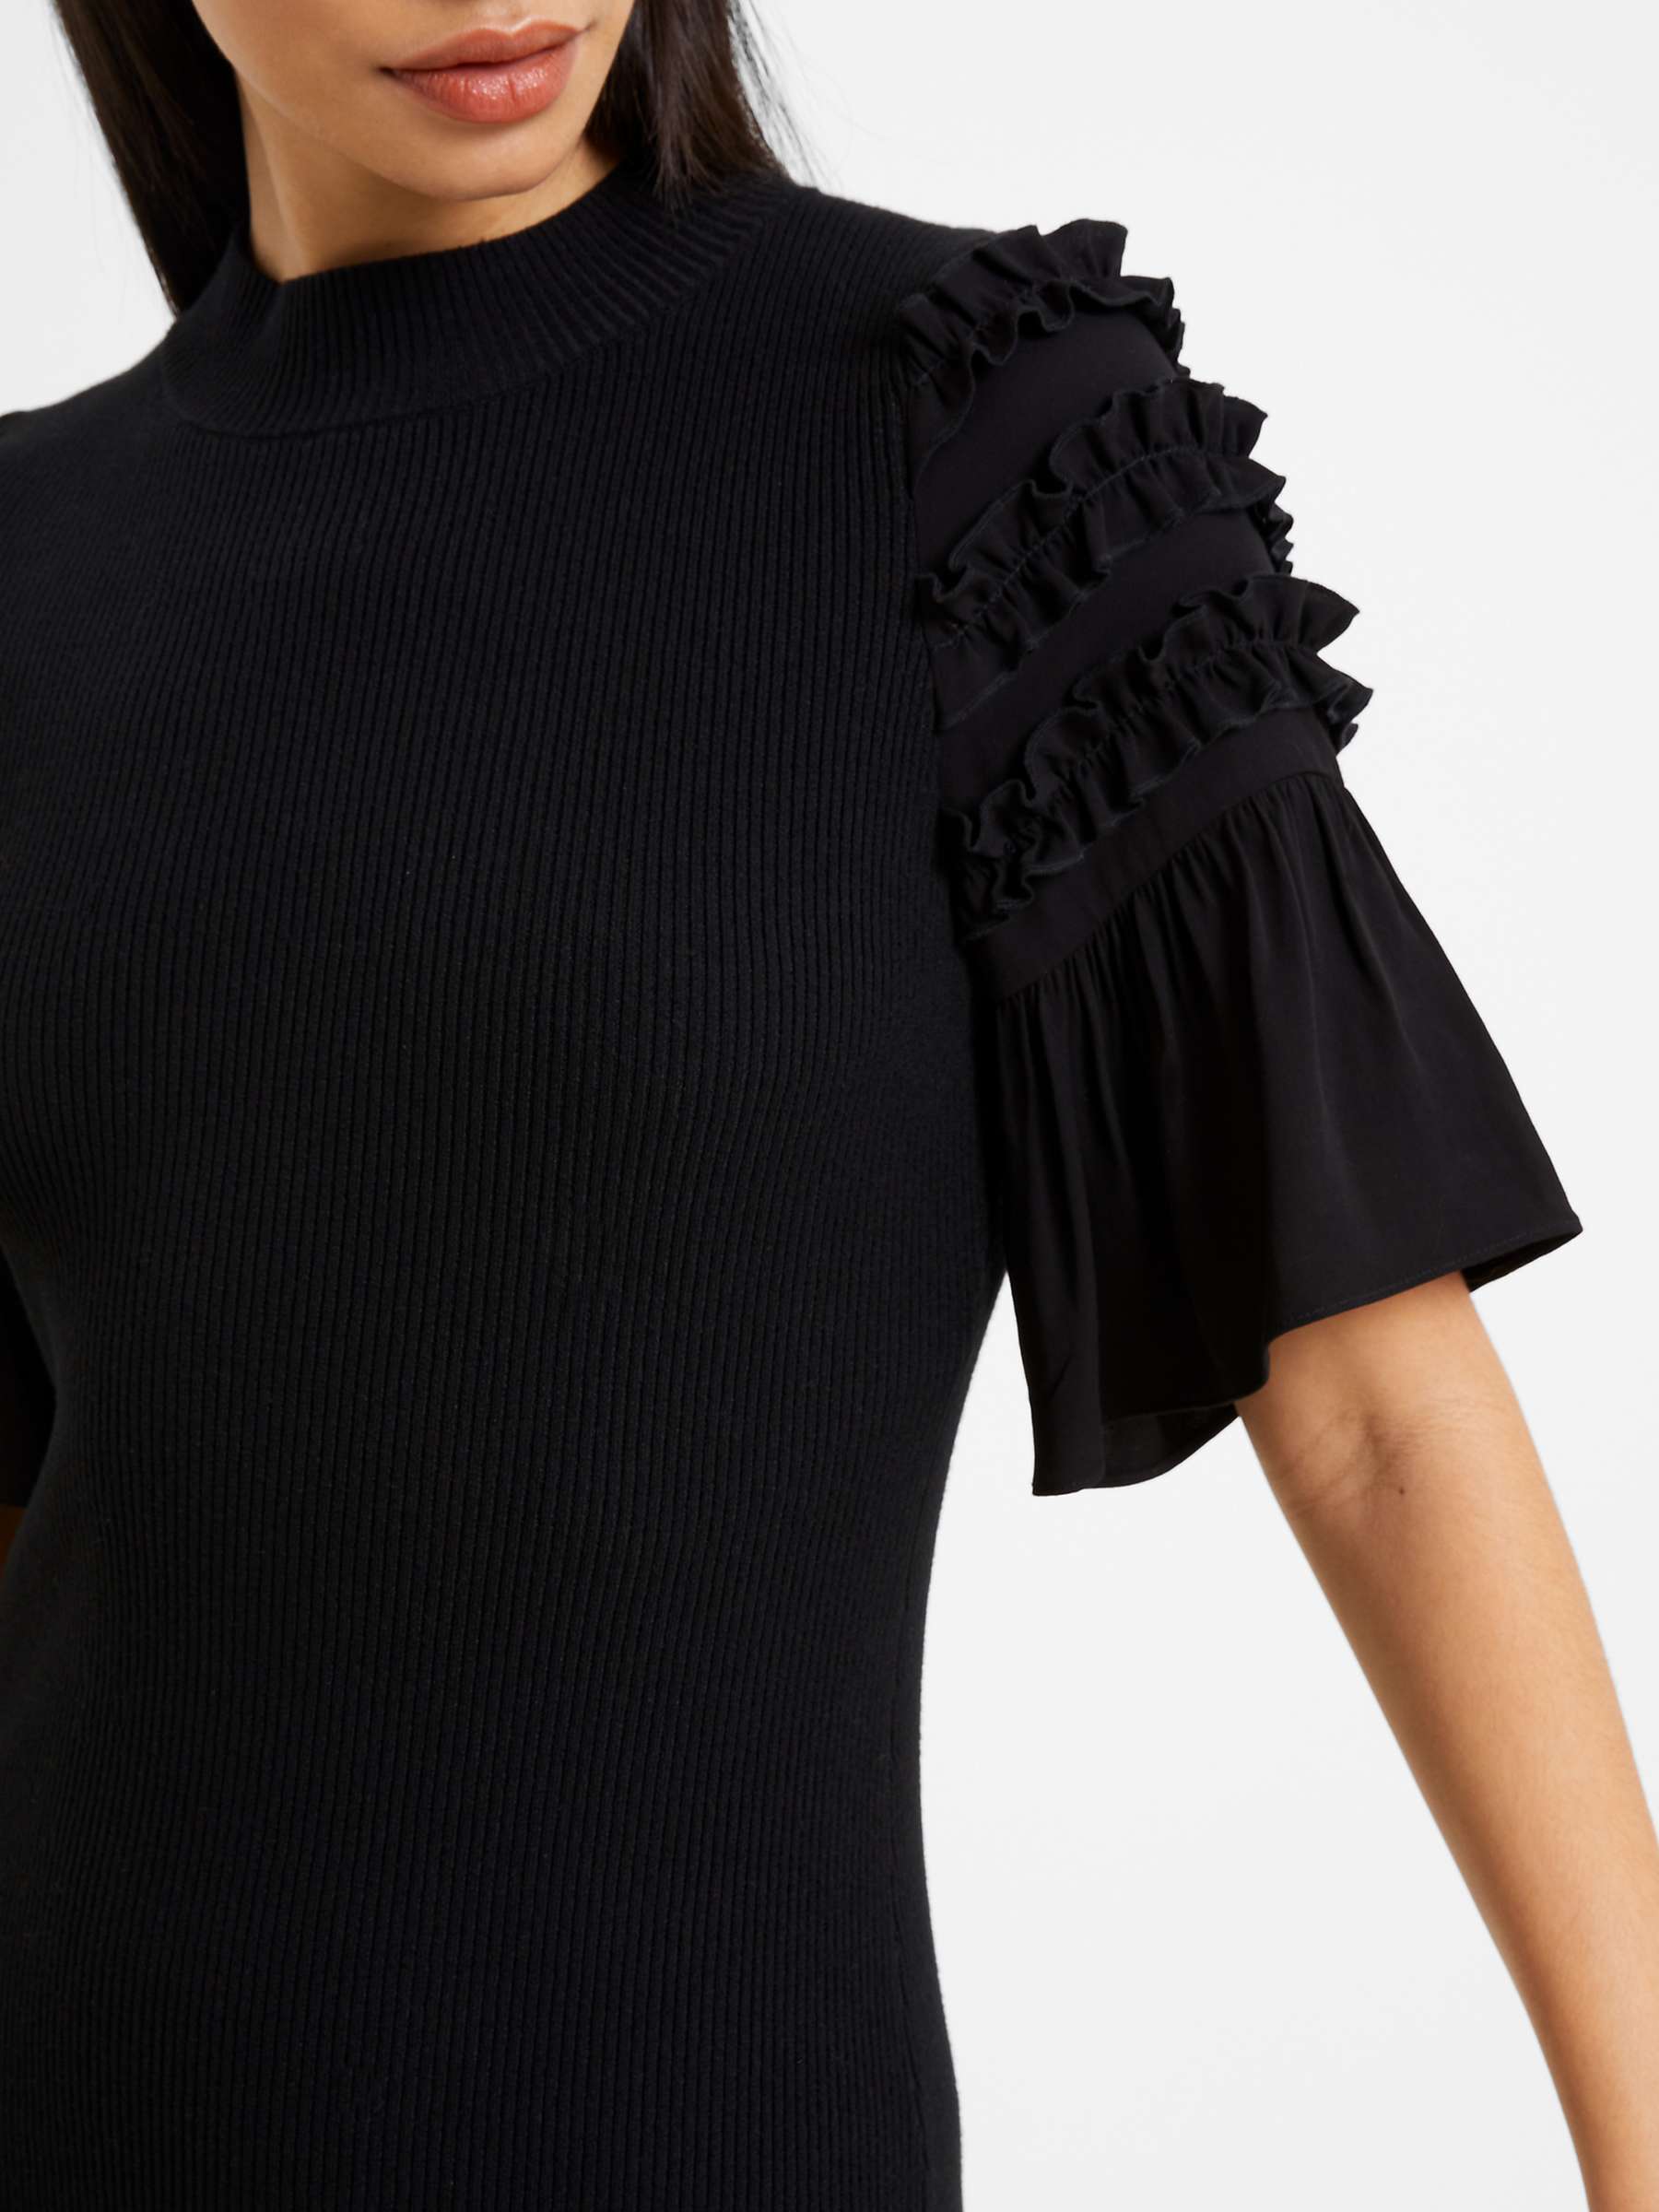 Buy French Connection Krista Mini Dress, Black Online at johnlewis.com